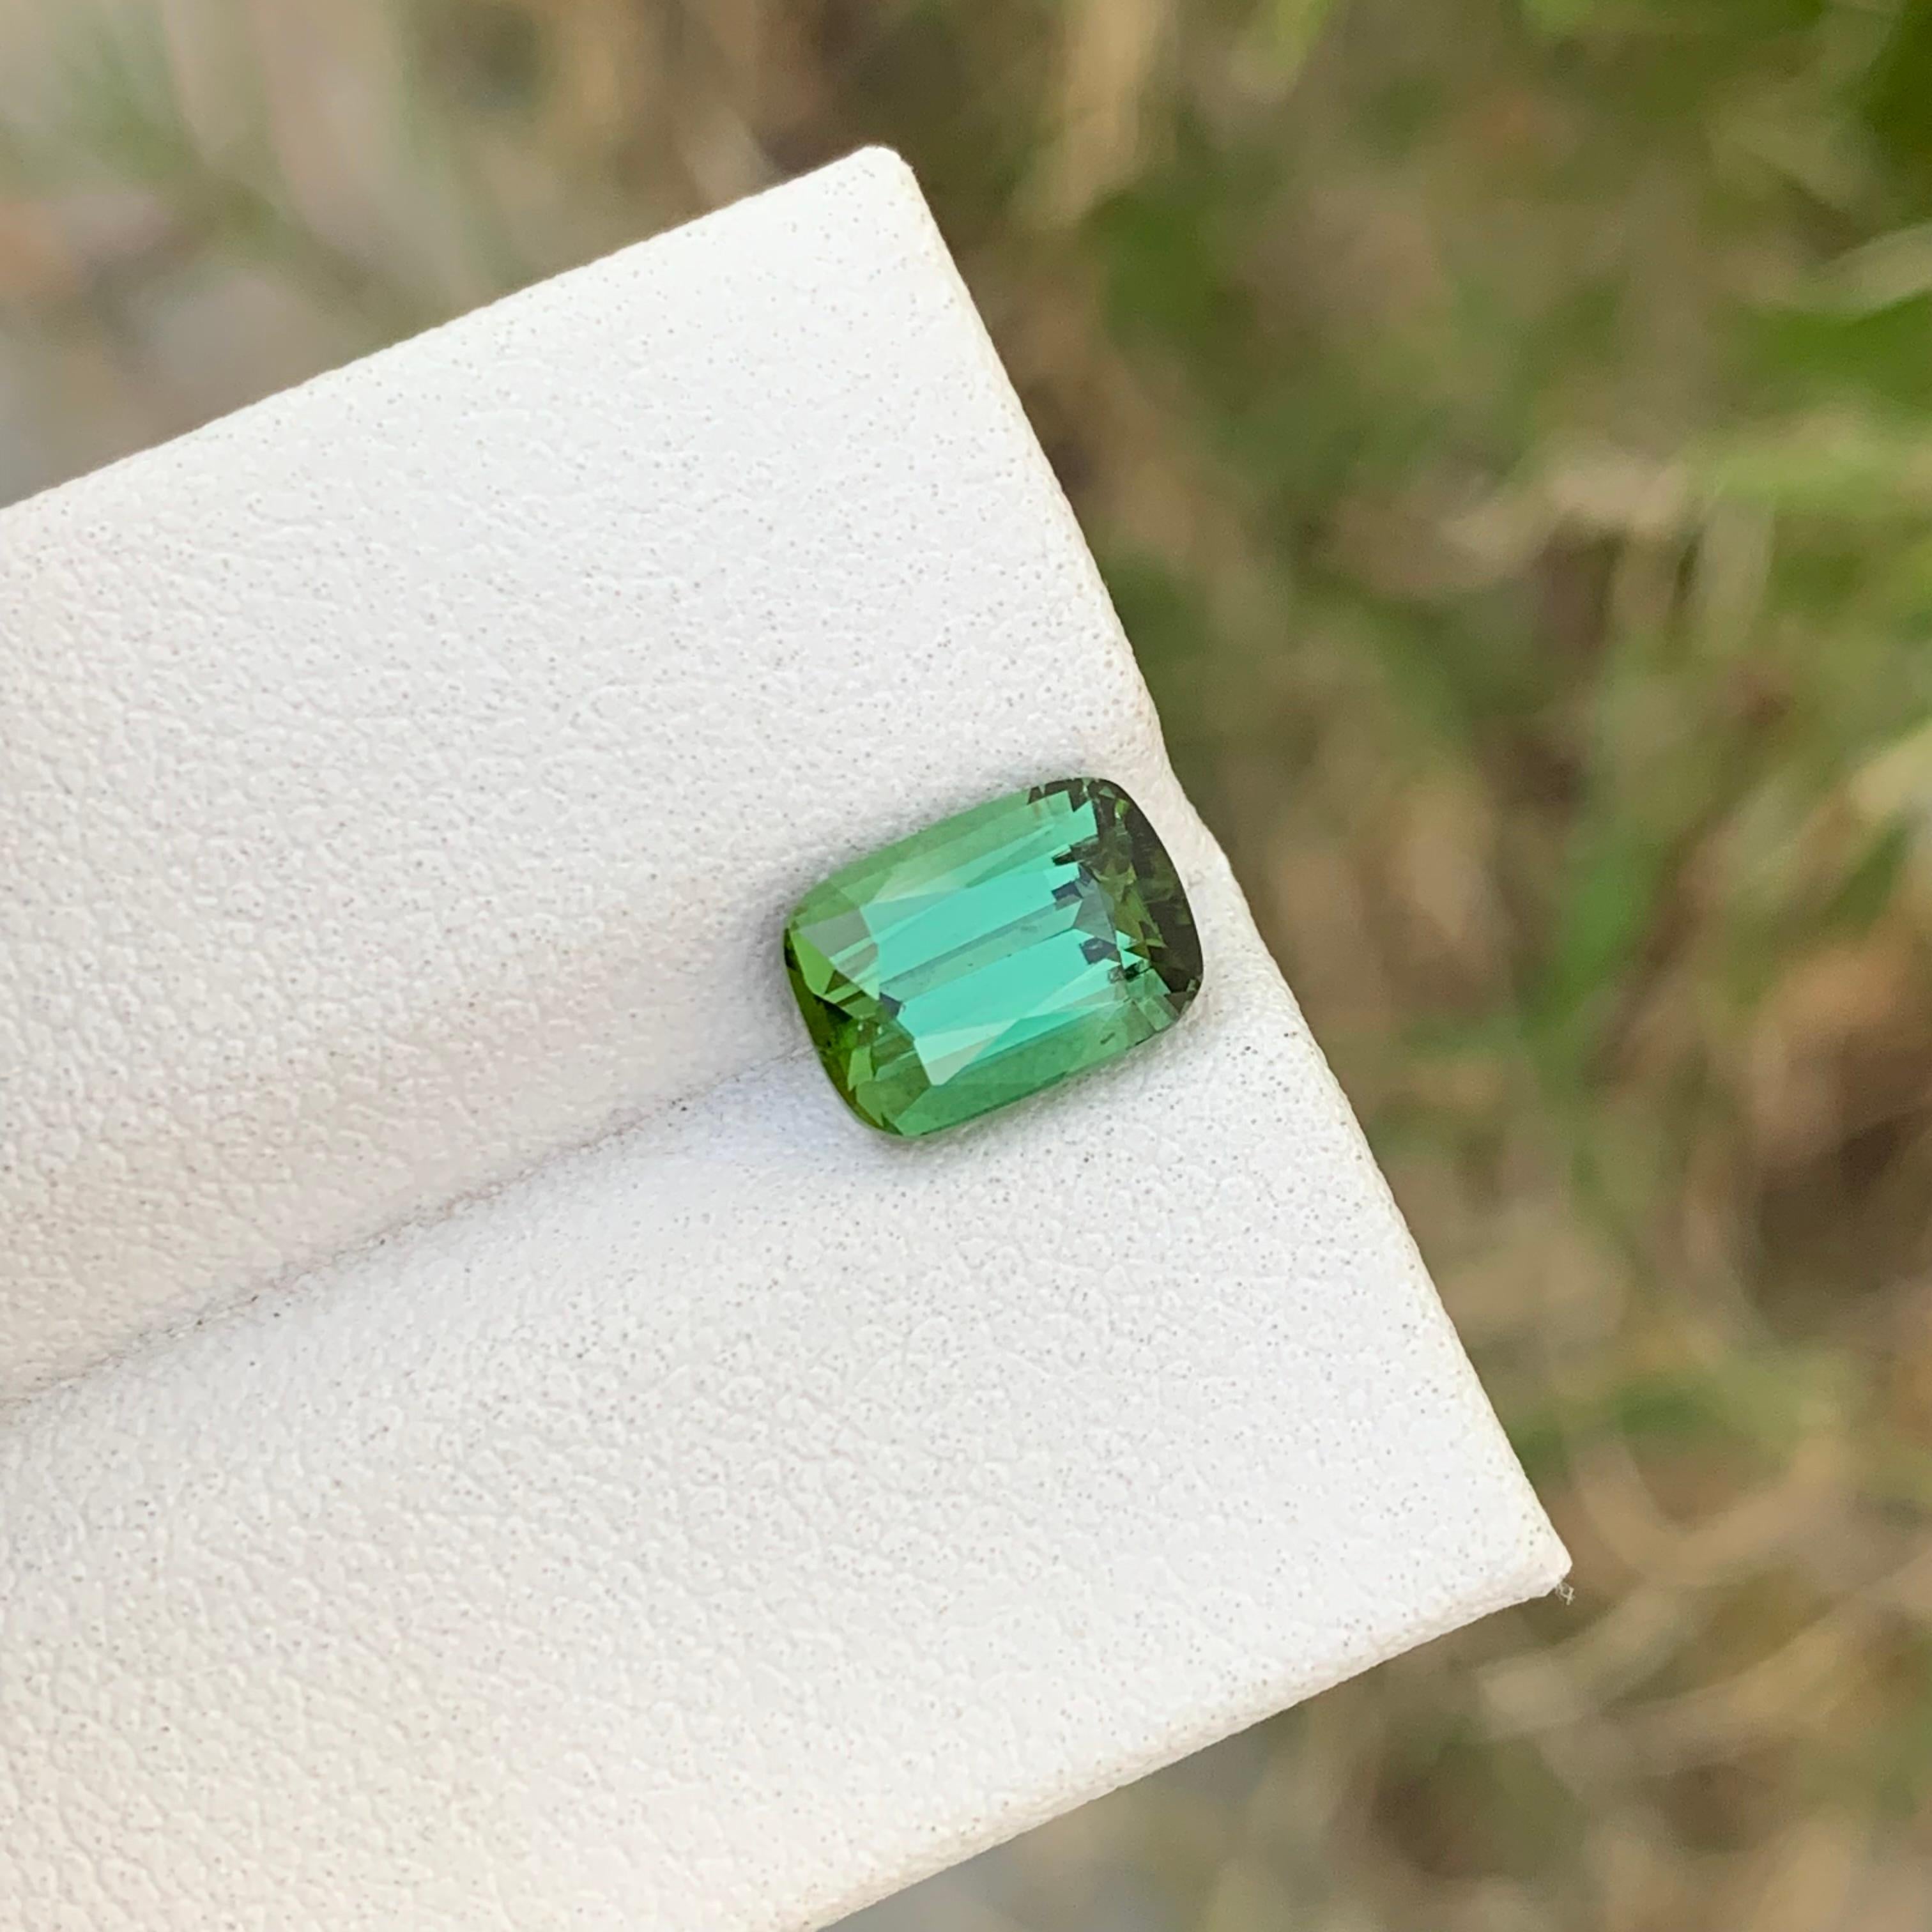 Women's or Men's 1.85 Carat Natural Loose Lagoon Tourmaline Emerald Shape Gem For Jewellery For Sale